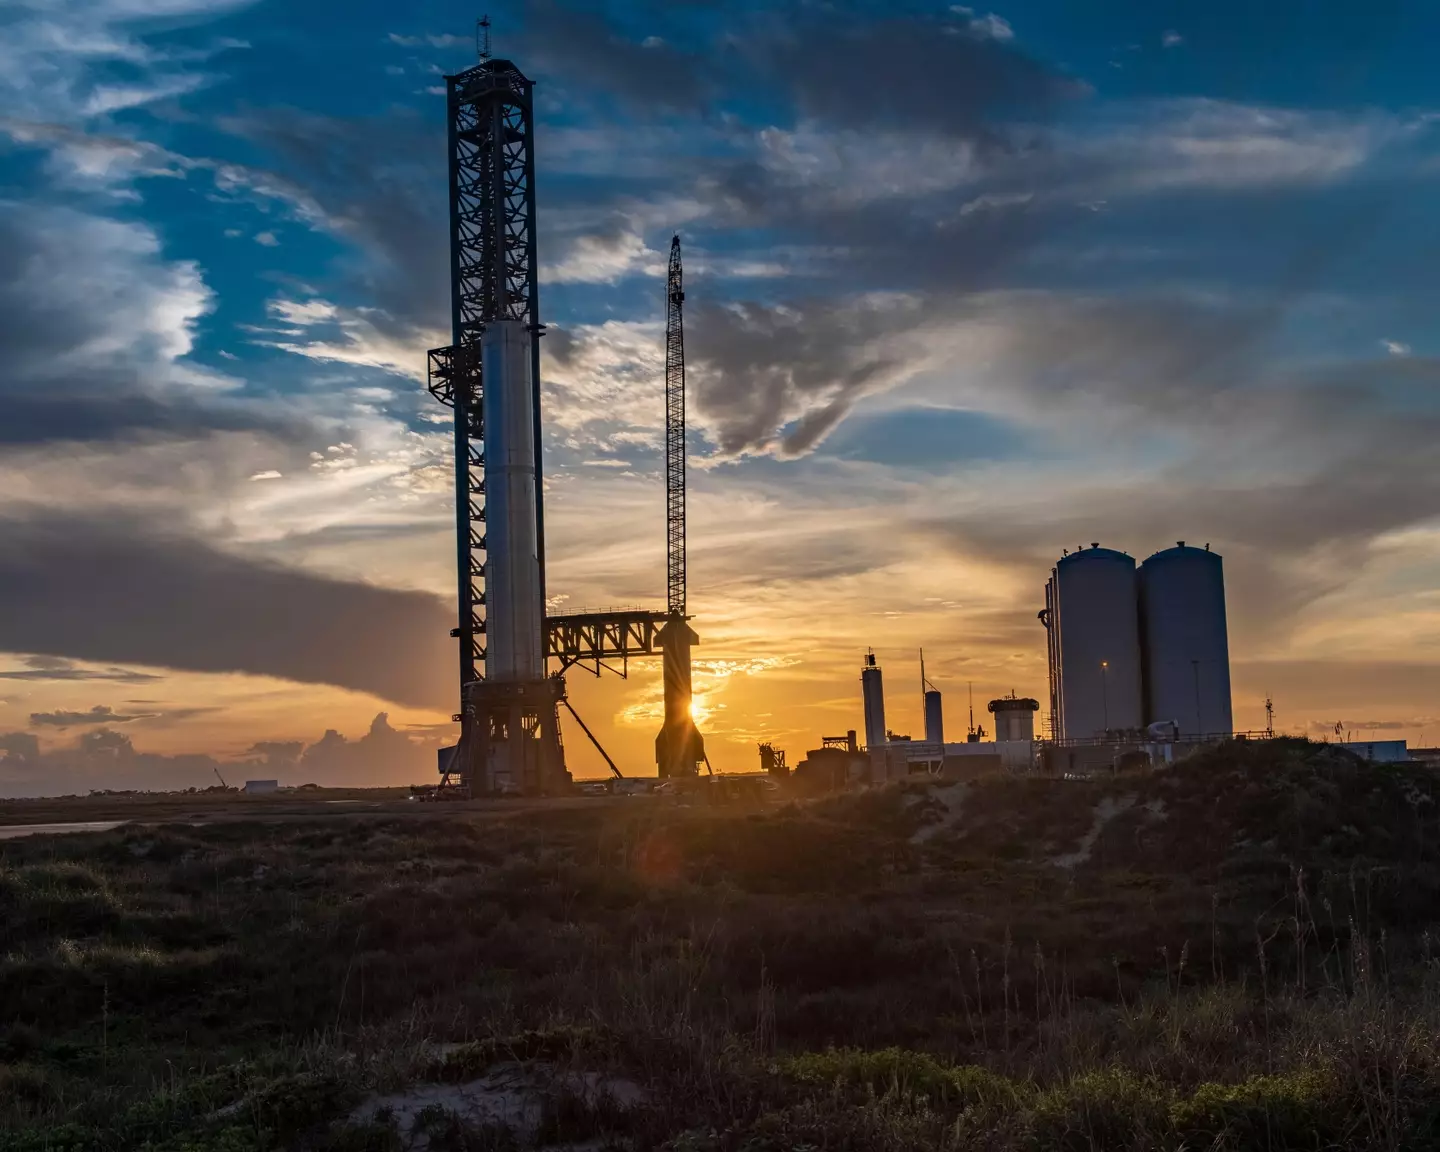 The SpaceX launchpad in Texas.